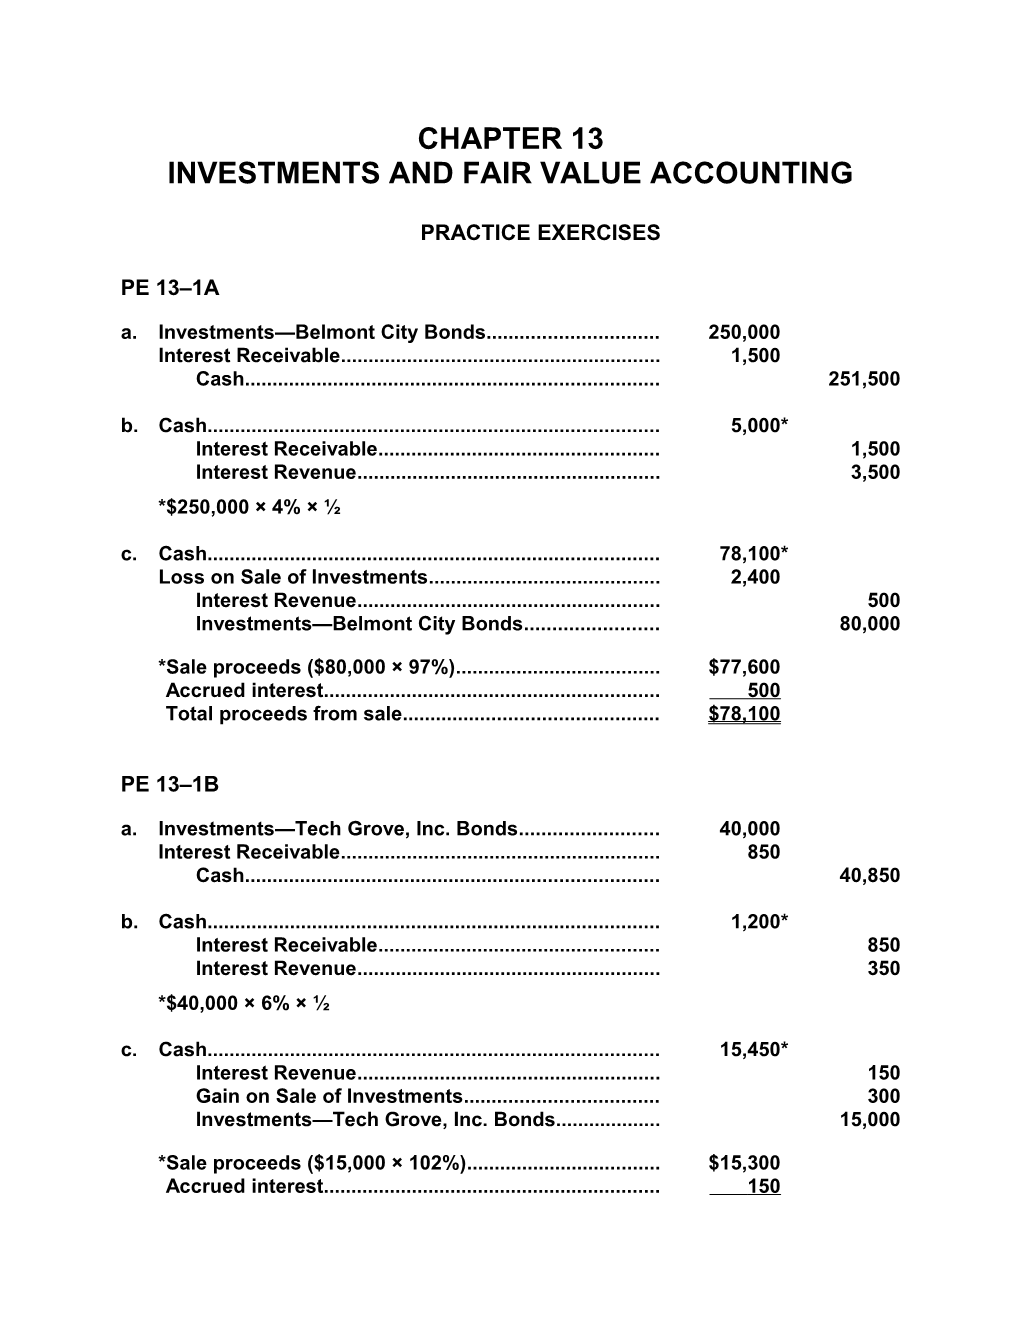 CHAPTER 13Investments and Fair Value Accounting